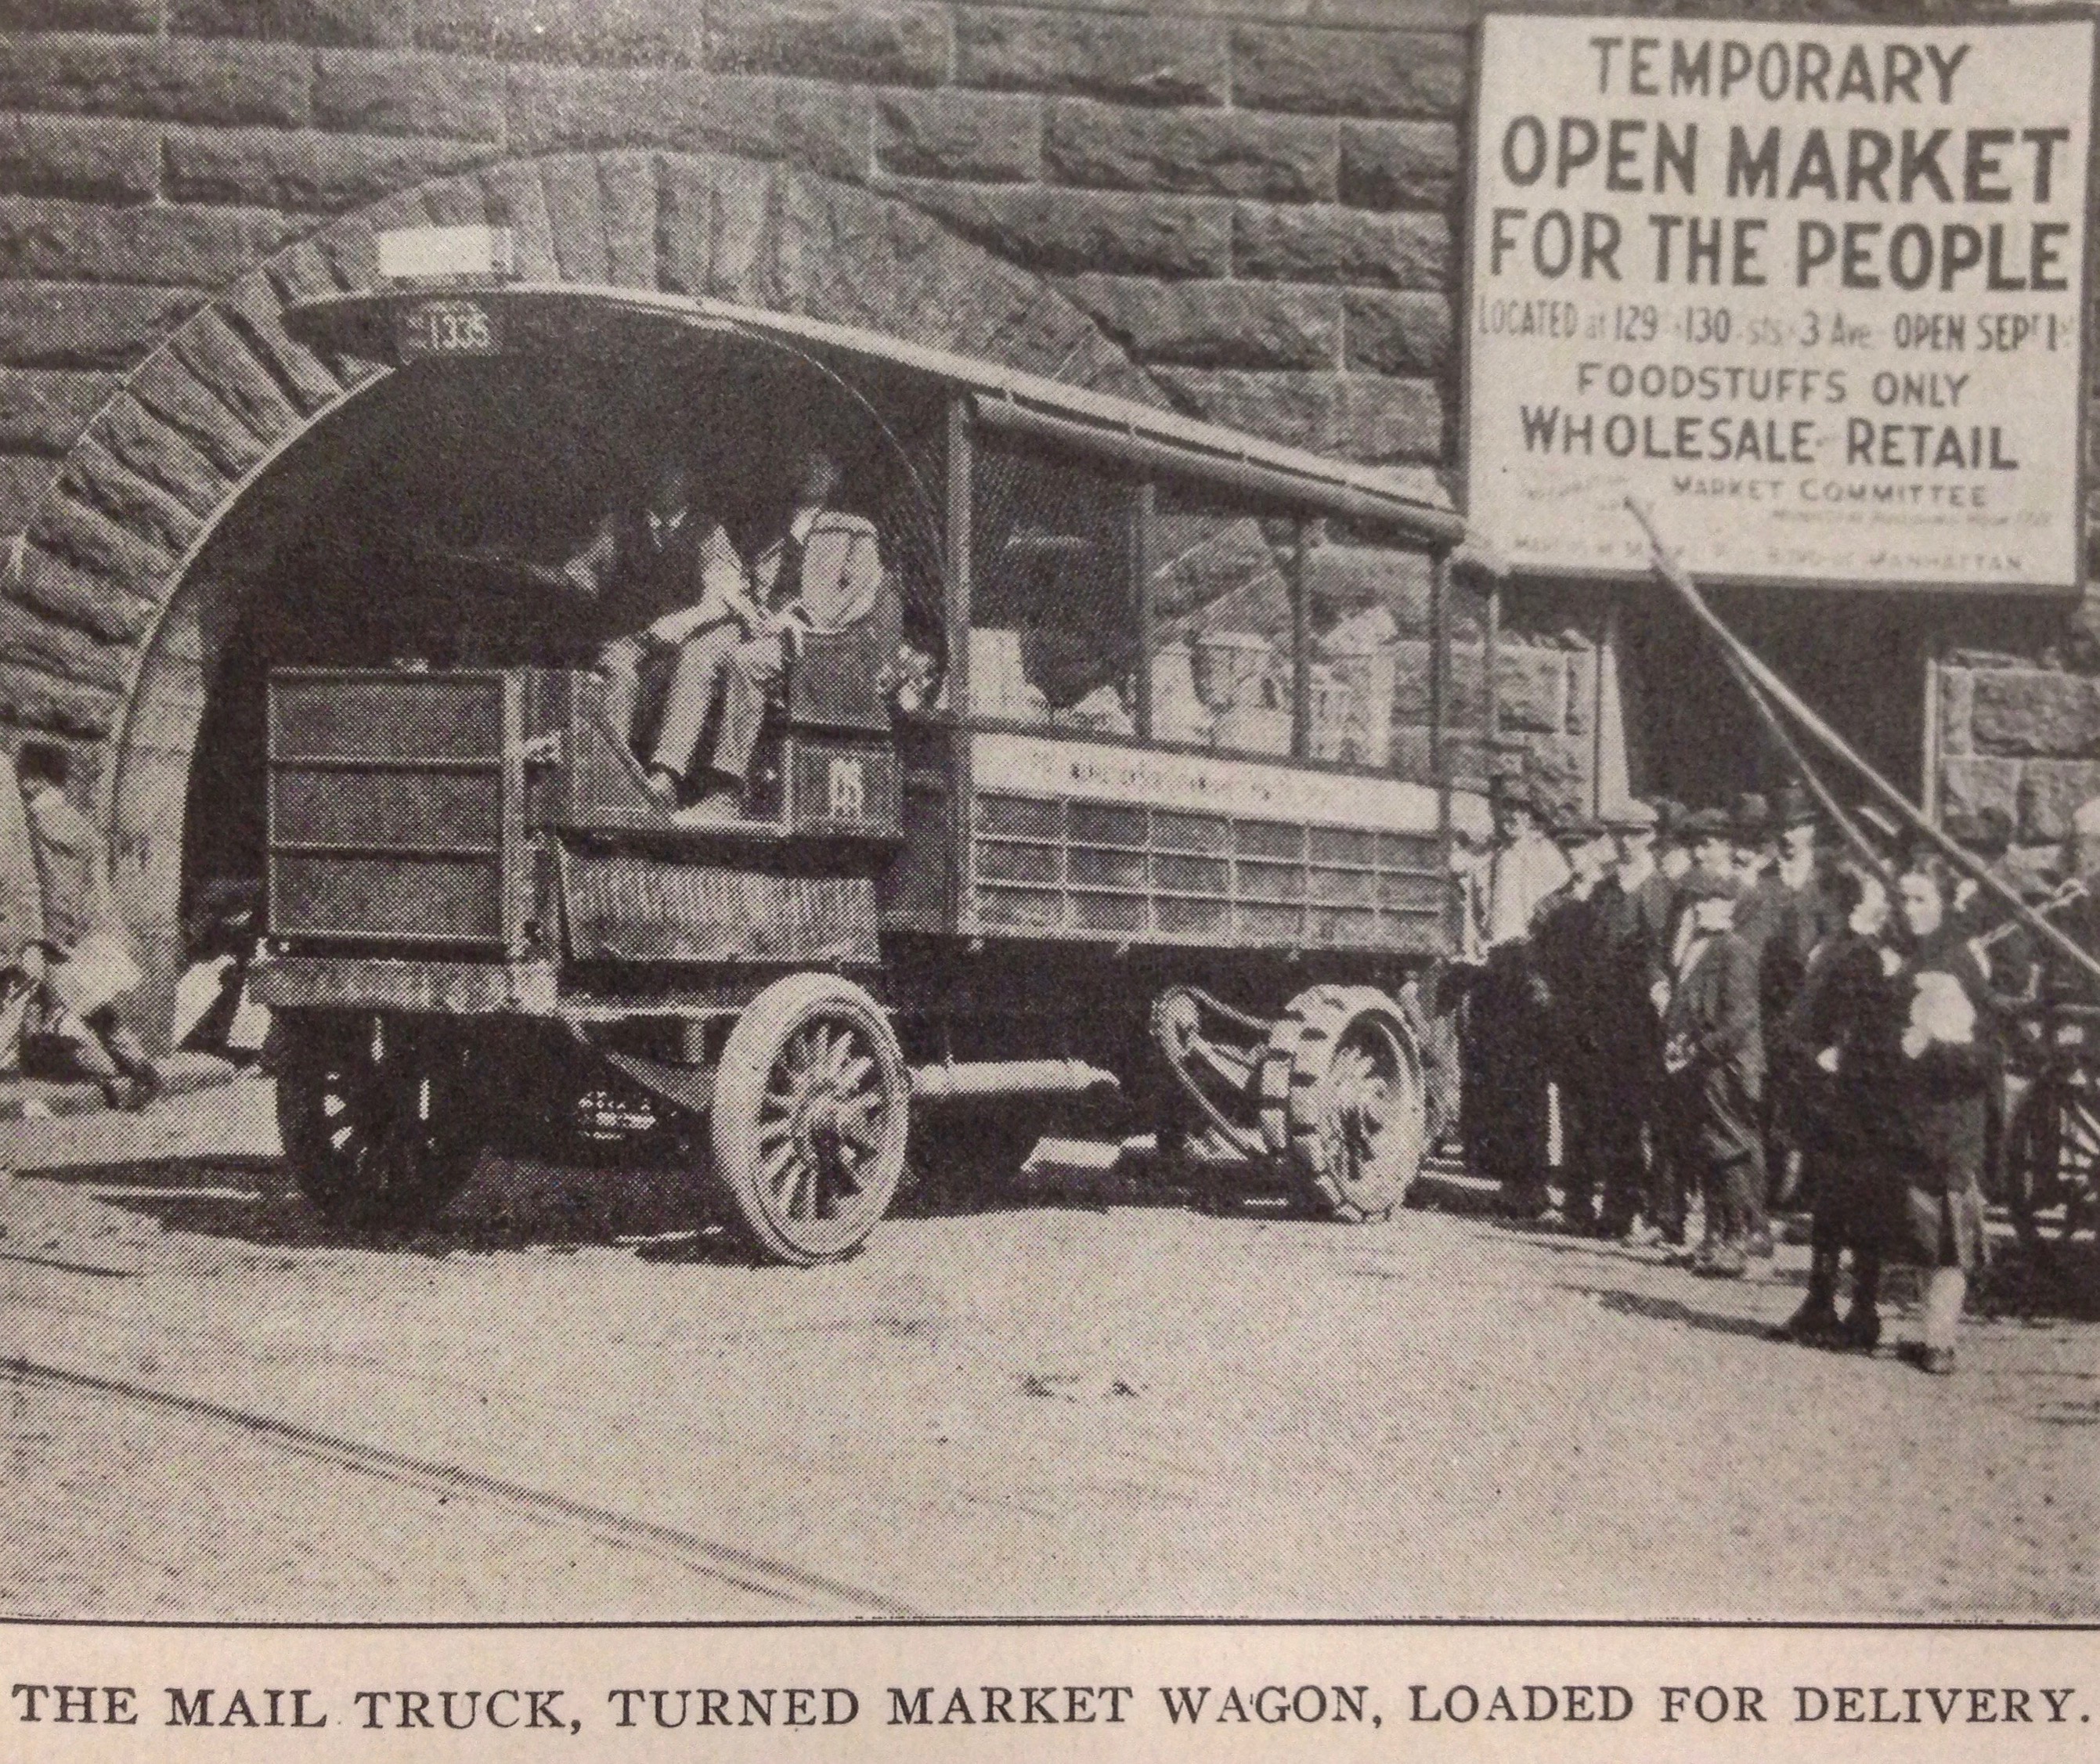 A mail truck transformed into a market wagon carrying food